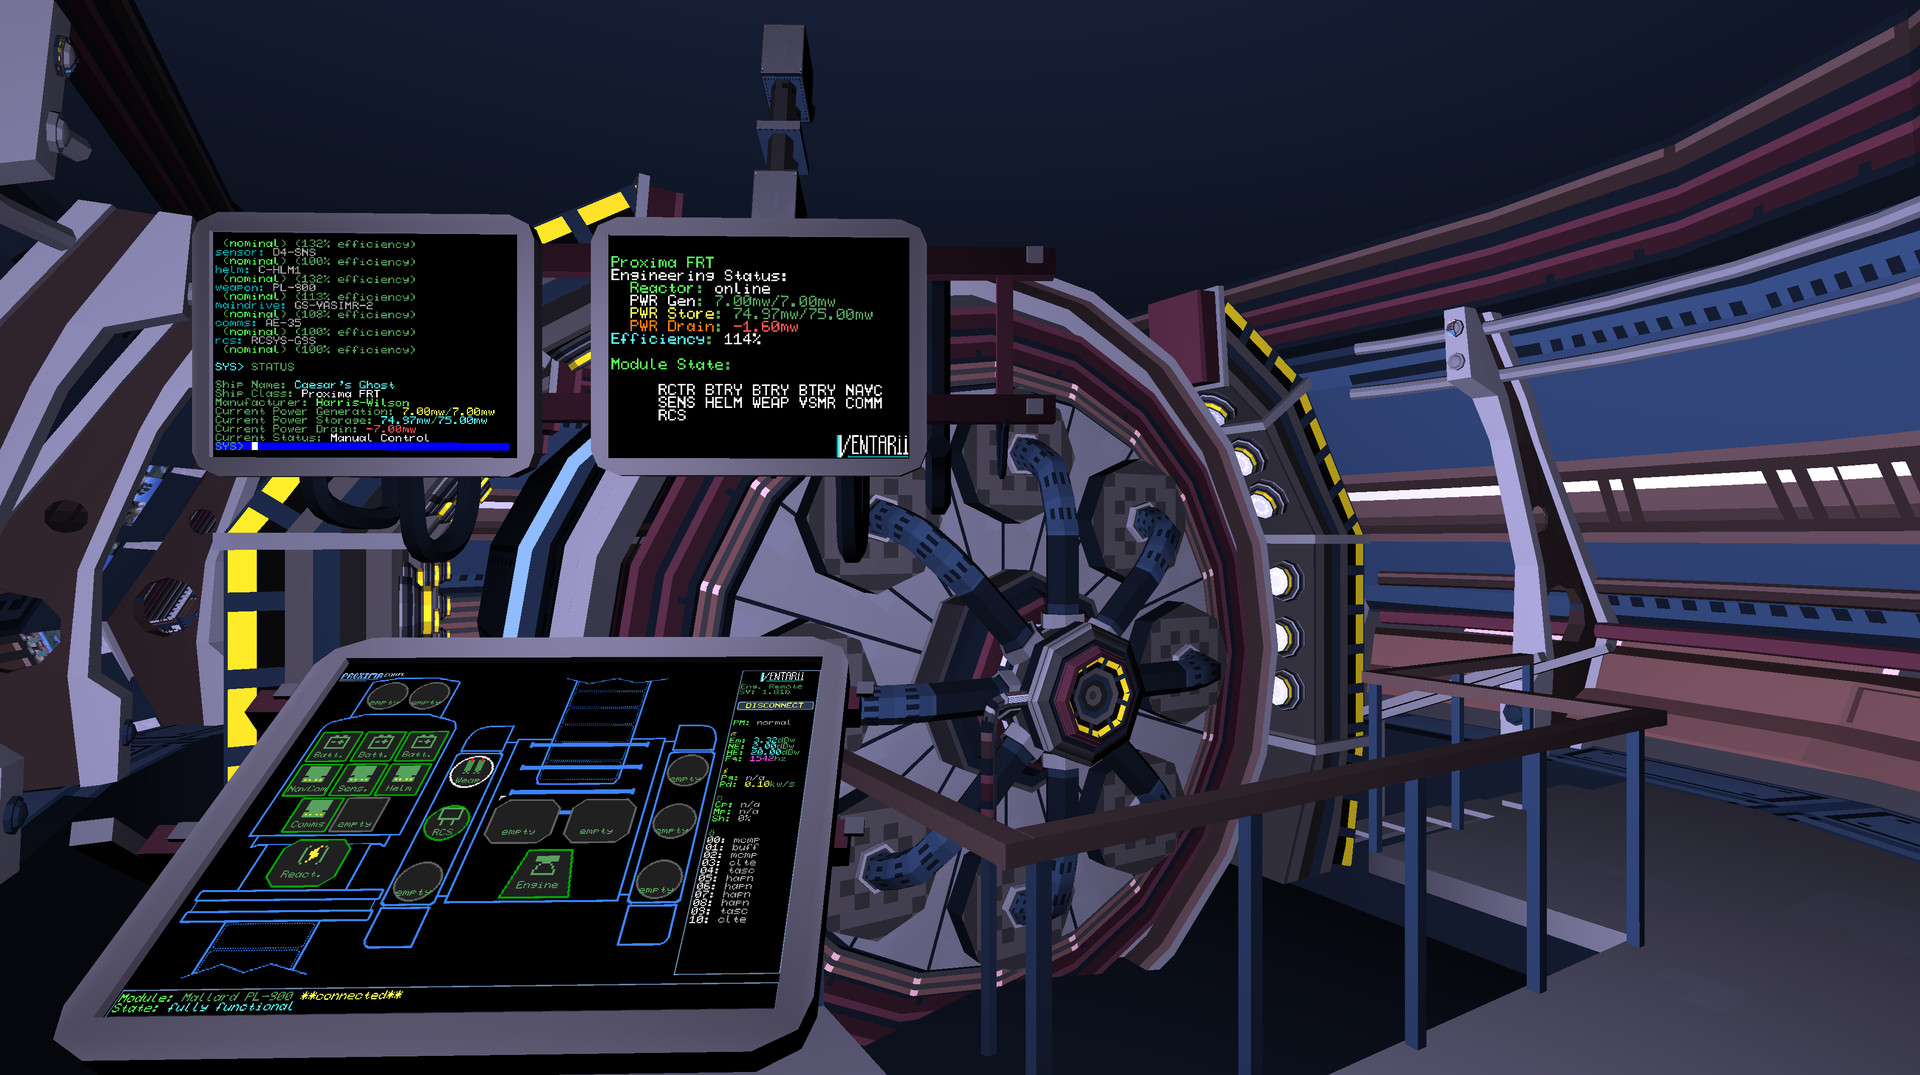 Objects in Space screenshot 2